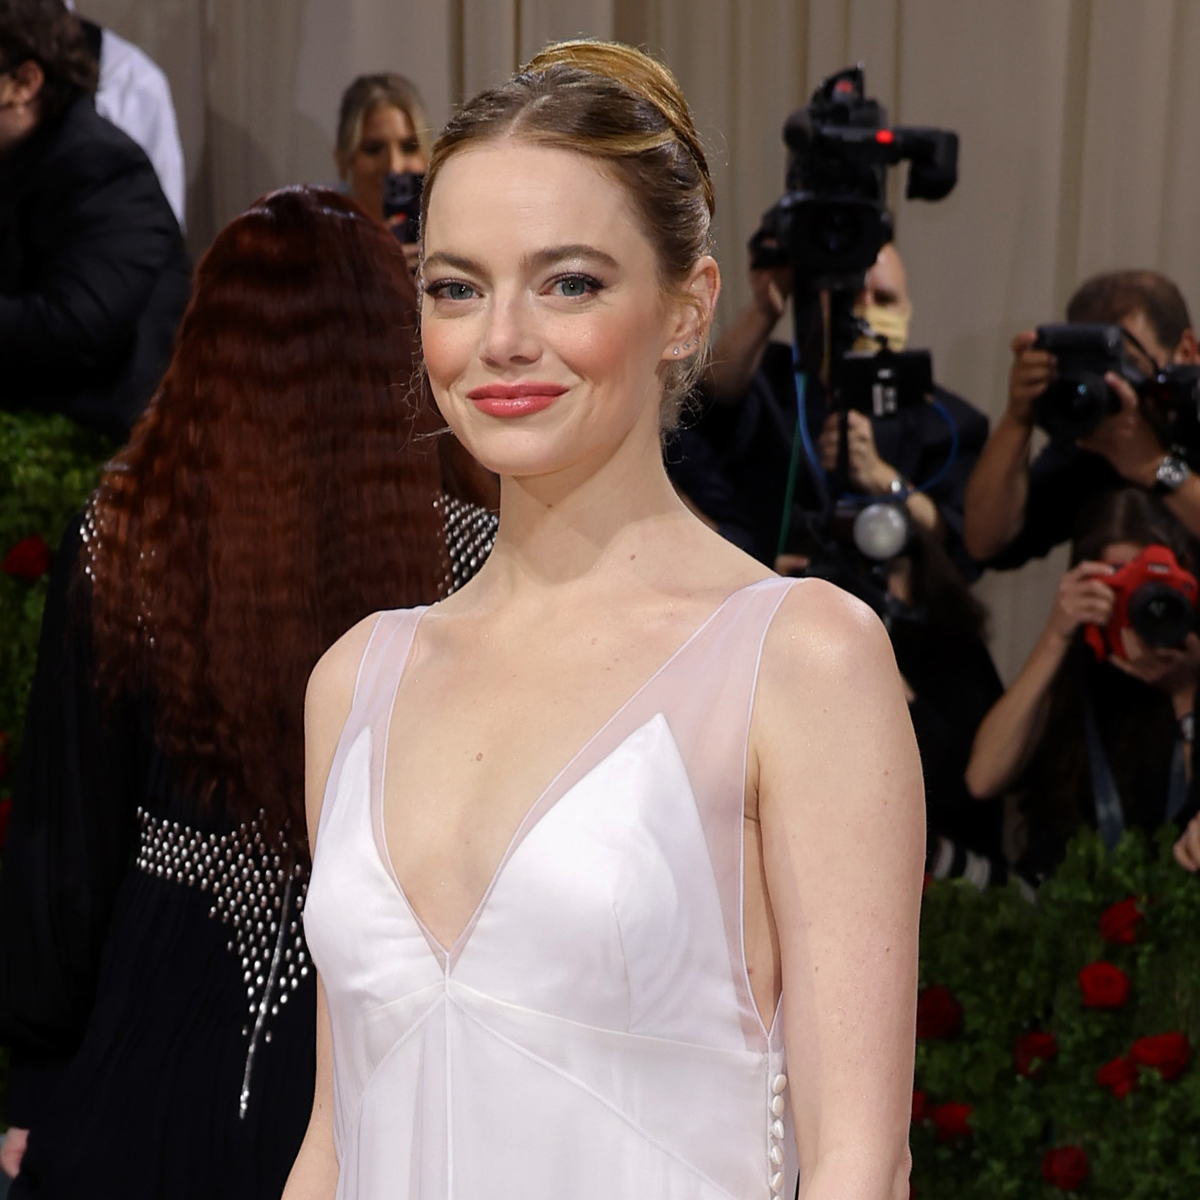 Emma Stone Wore One Of Her Wedding Looks To The Met Gala